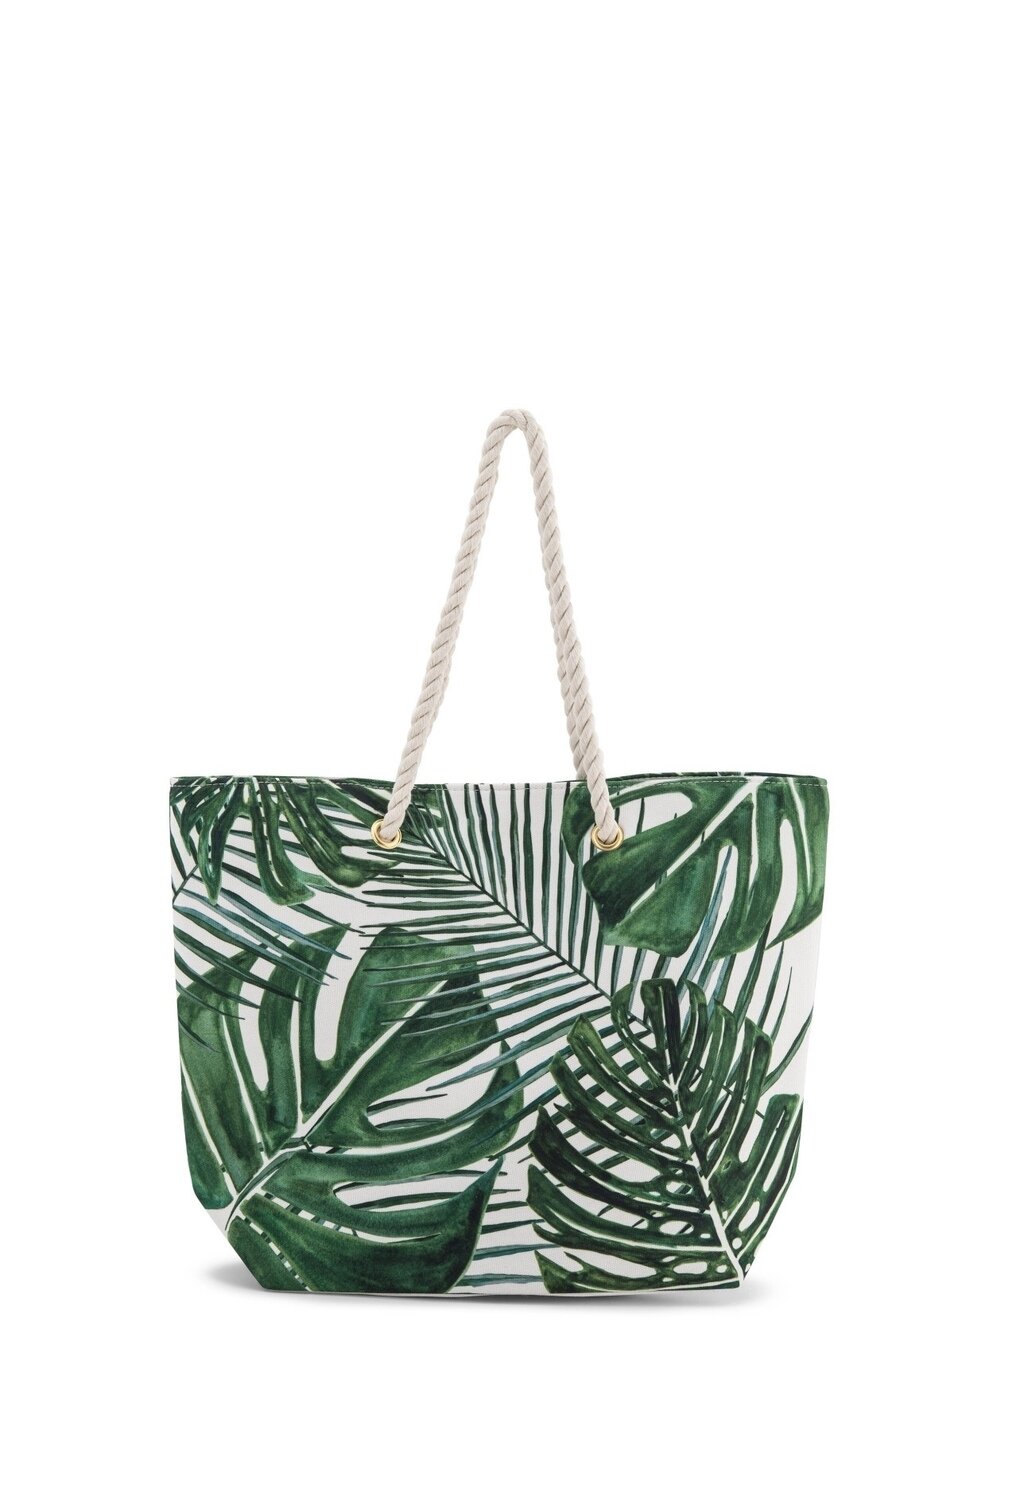 Extra Large Cotton Canvas Fabric Beach Tote Bag-Green Palm